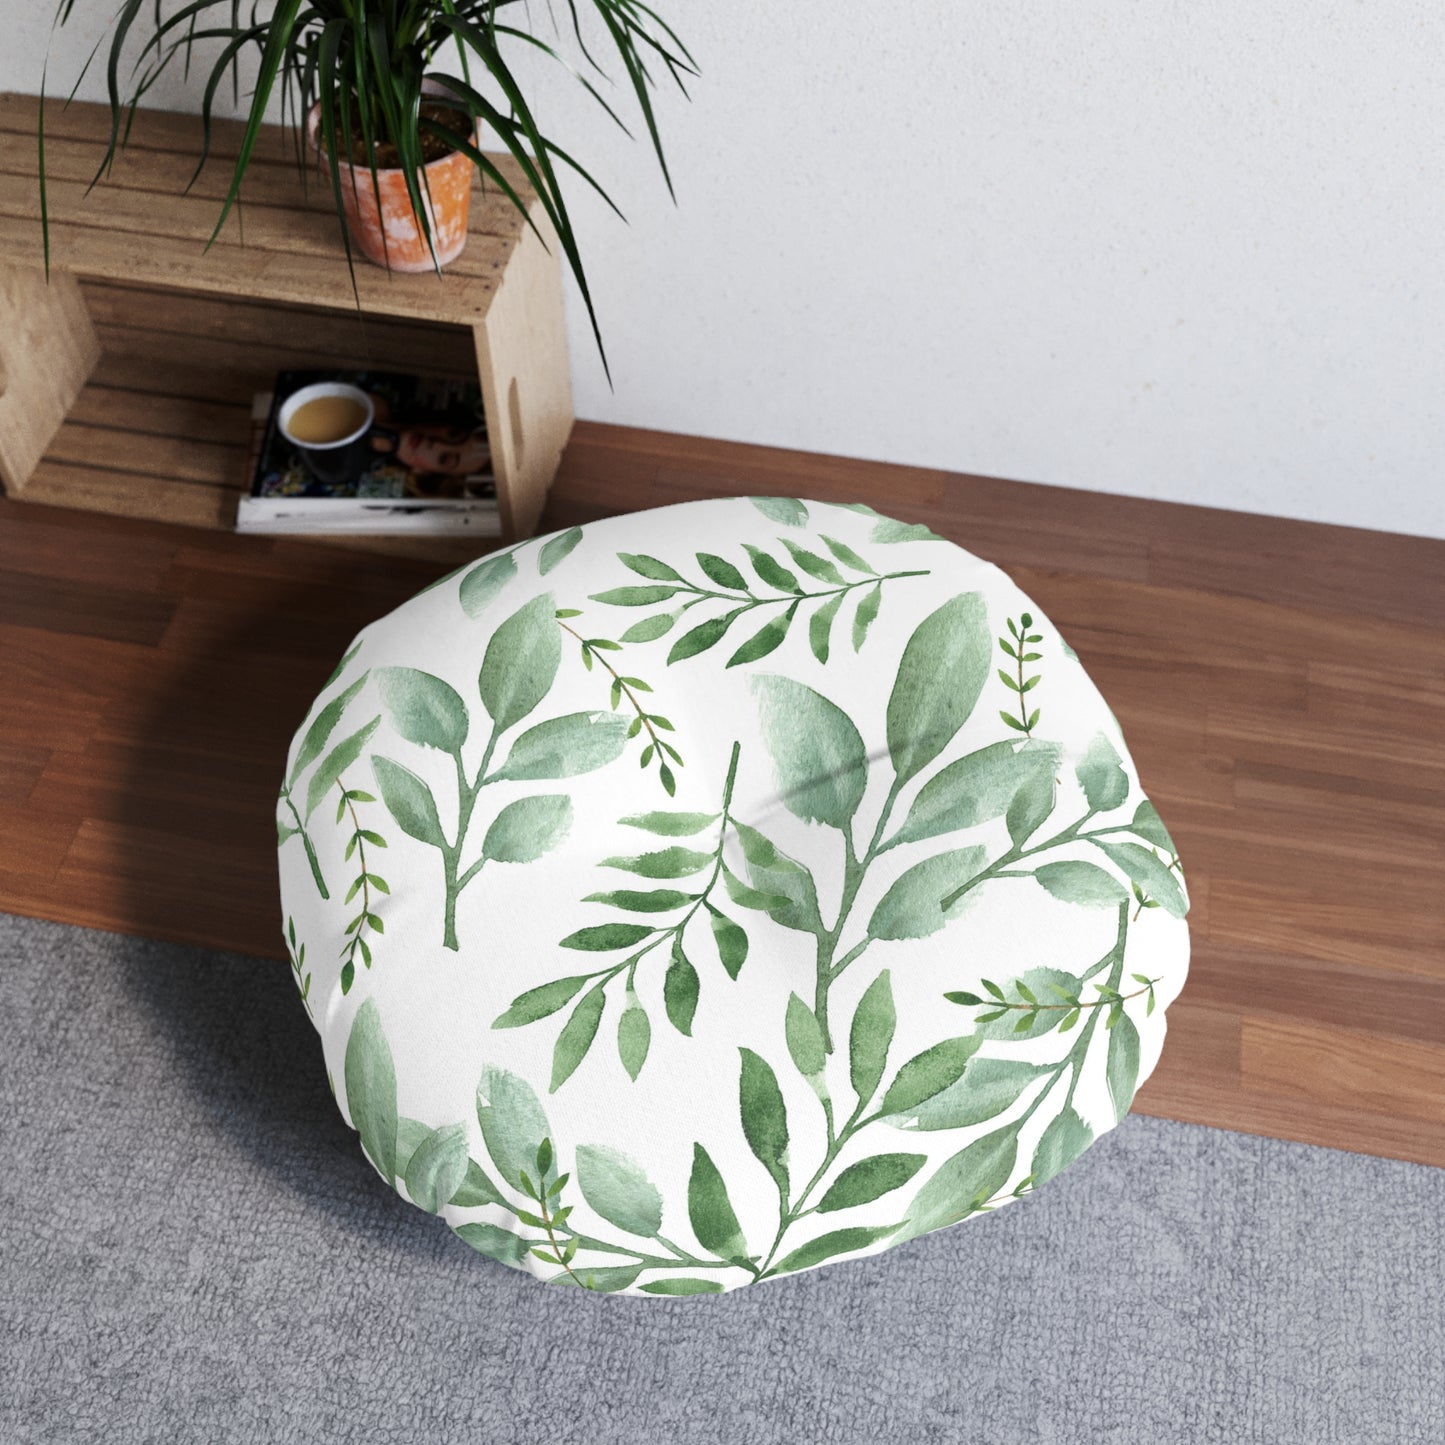 Printify's Round Tufted Floor-Pillow with a green botanical design on a wooden bench, made in America.